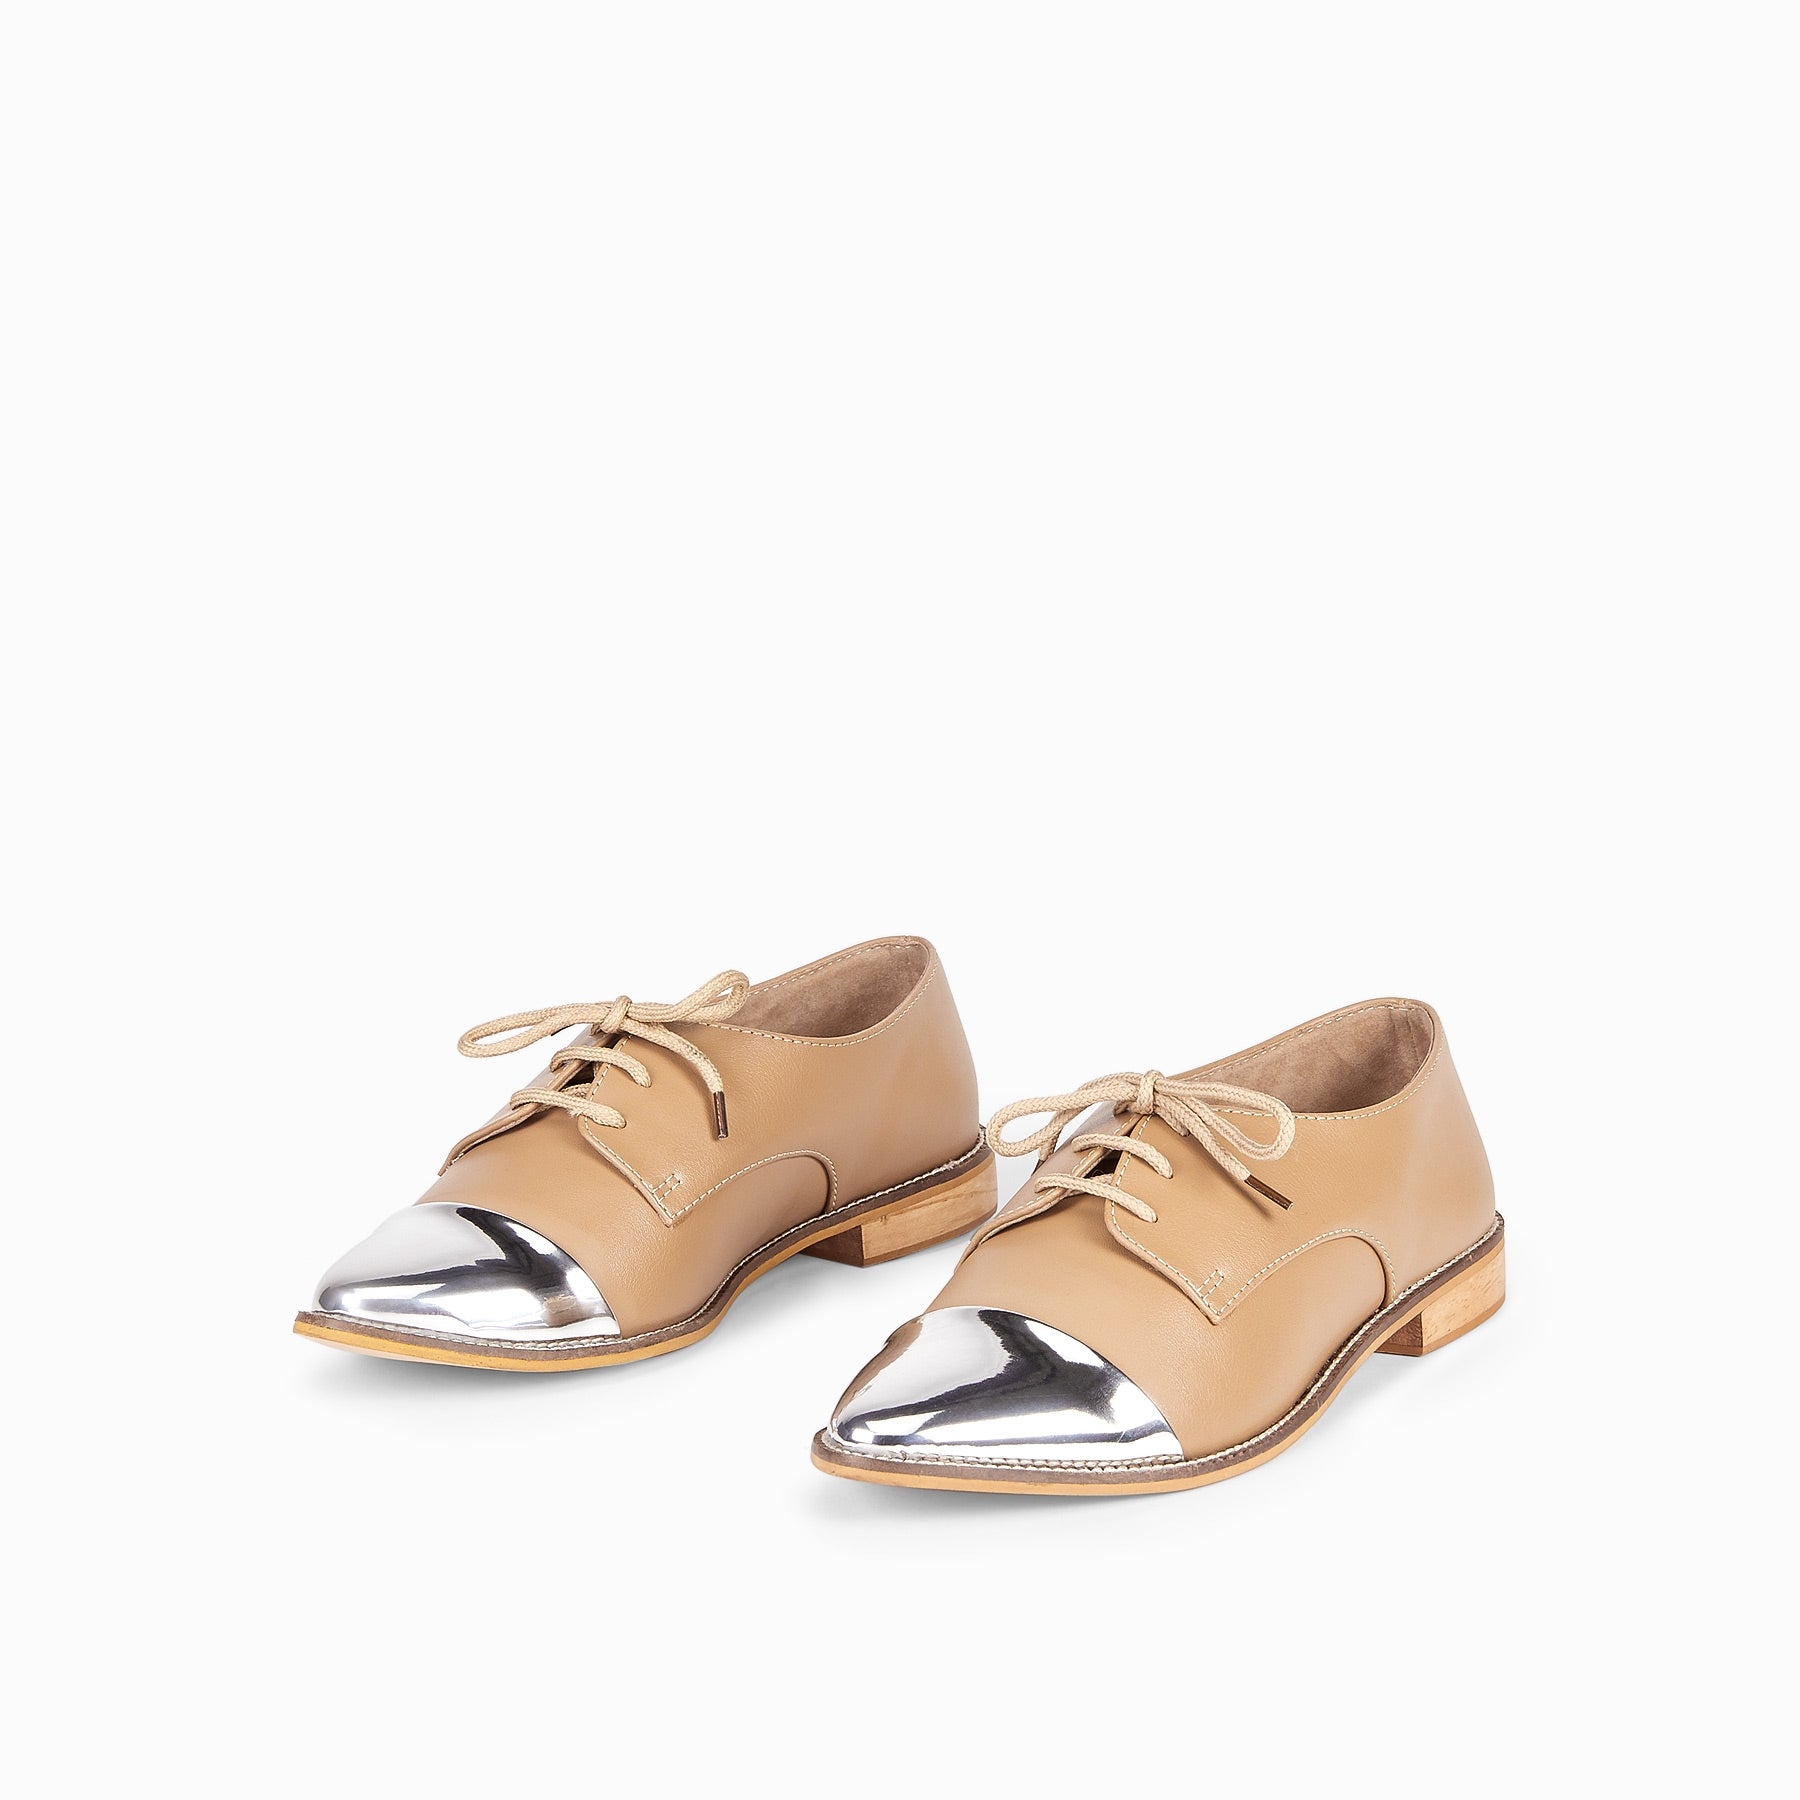 Beige & Silver Pointed Brogues